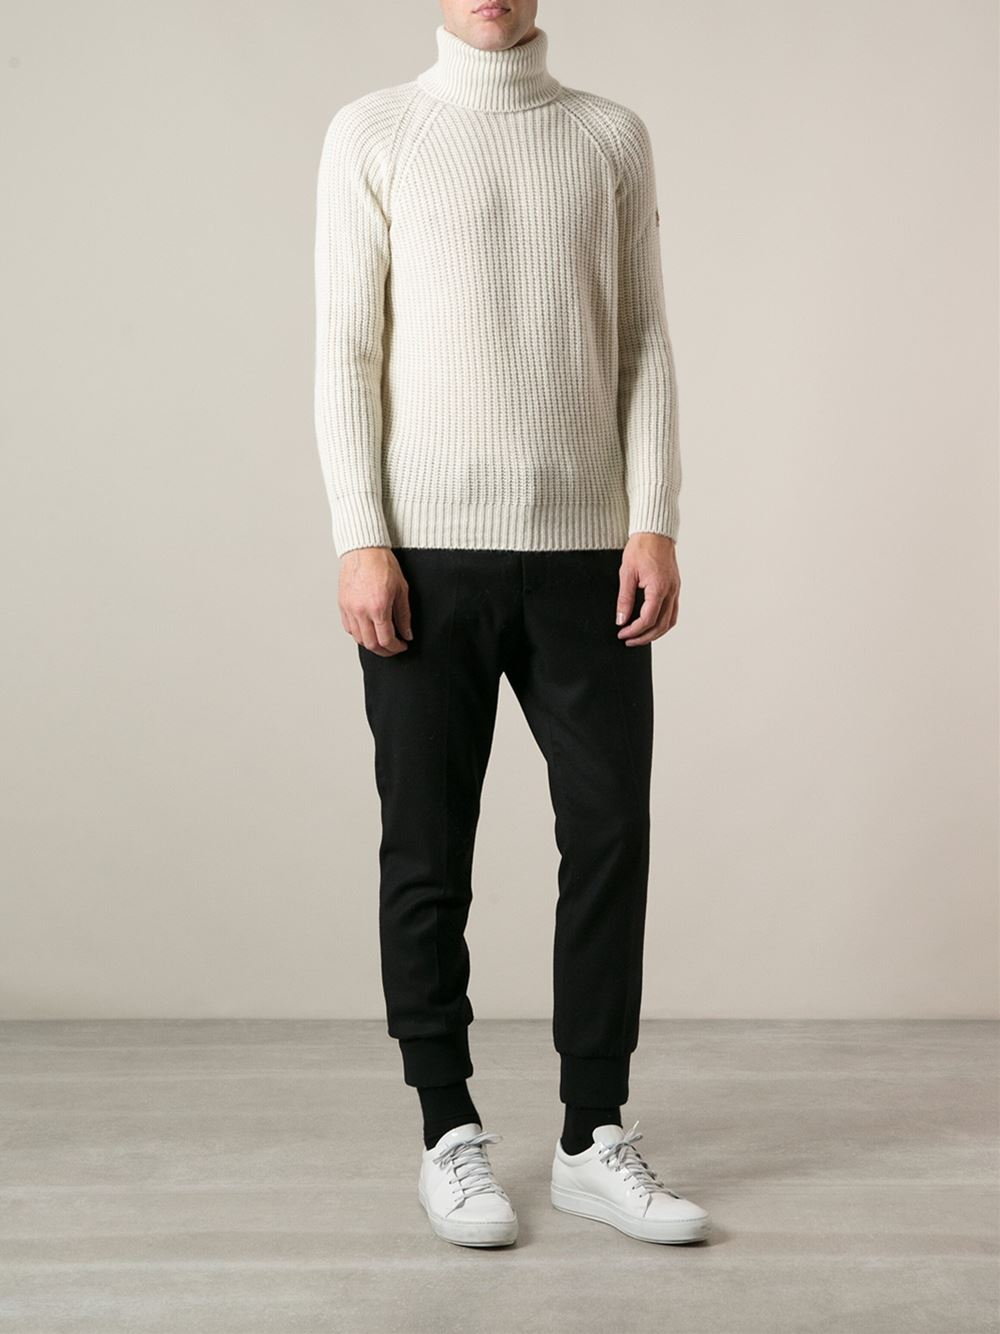 Lyst - Moncler Grenoble Chunky Knit Turtle Neck Sweater in White for Men